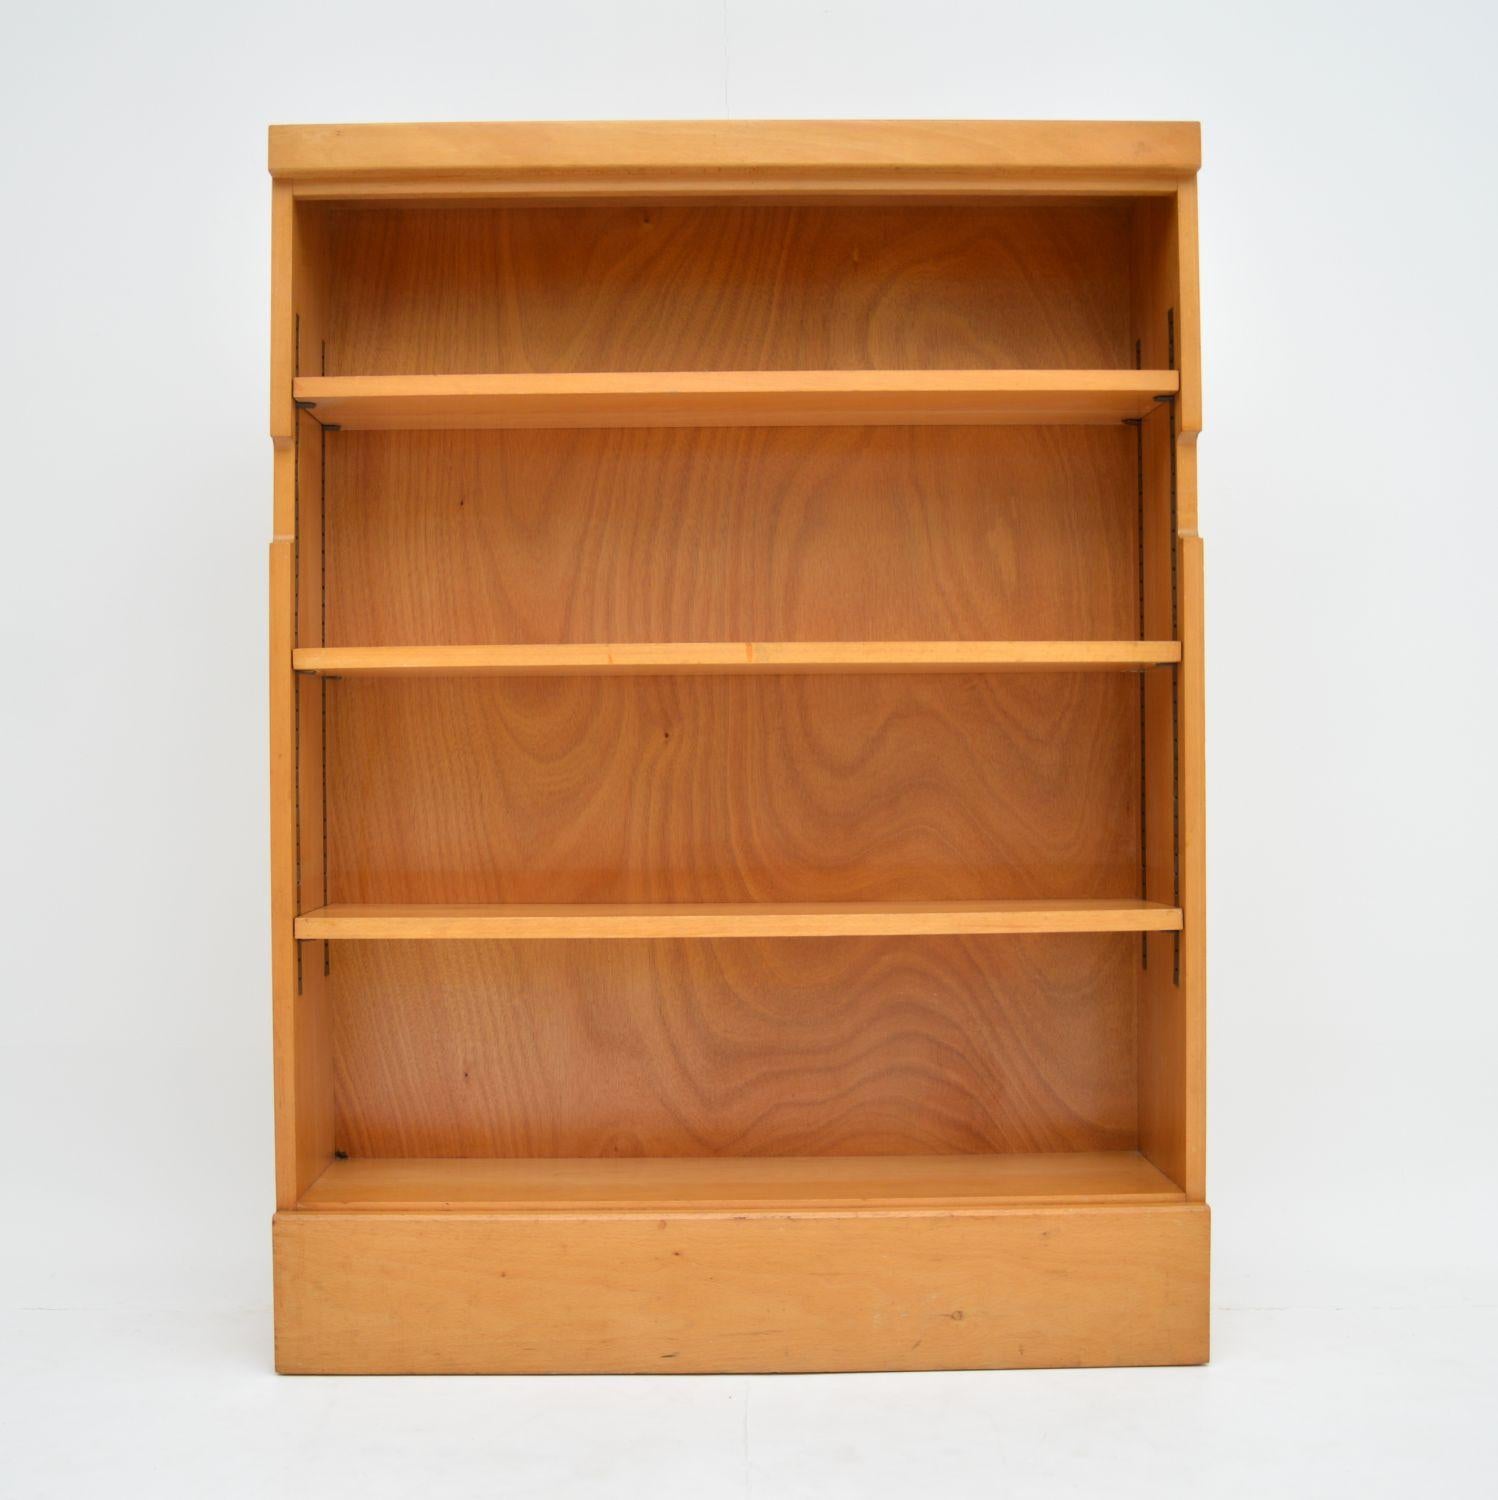 A smart and very useful vintage open bookcase, this dates from the 1950s-1960s. It was made by Kandya, and was most likely designed by Frank Guille. This is in lovely vintage condition, with only some minor wear to be seen. The shelves are removable